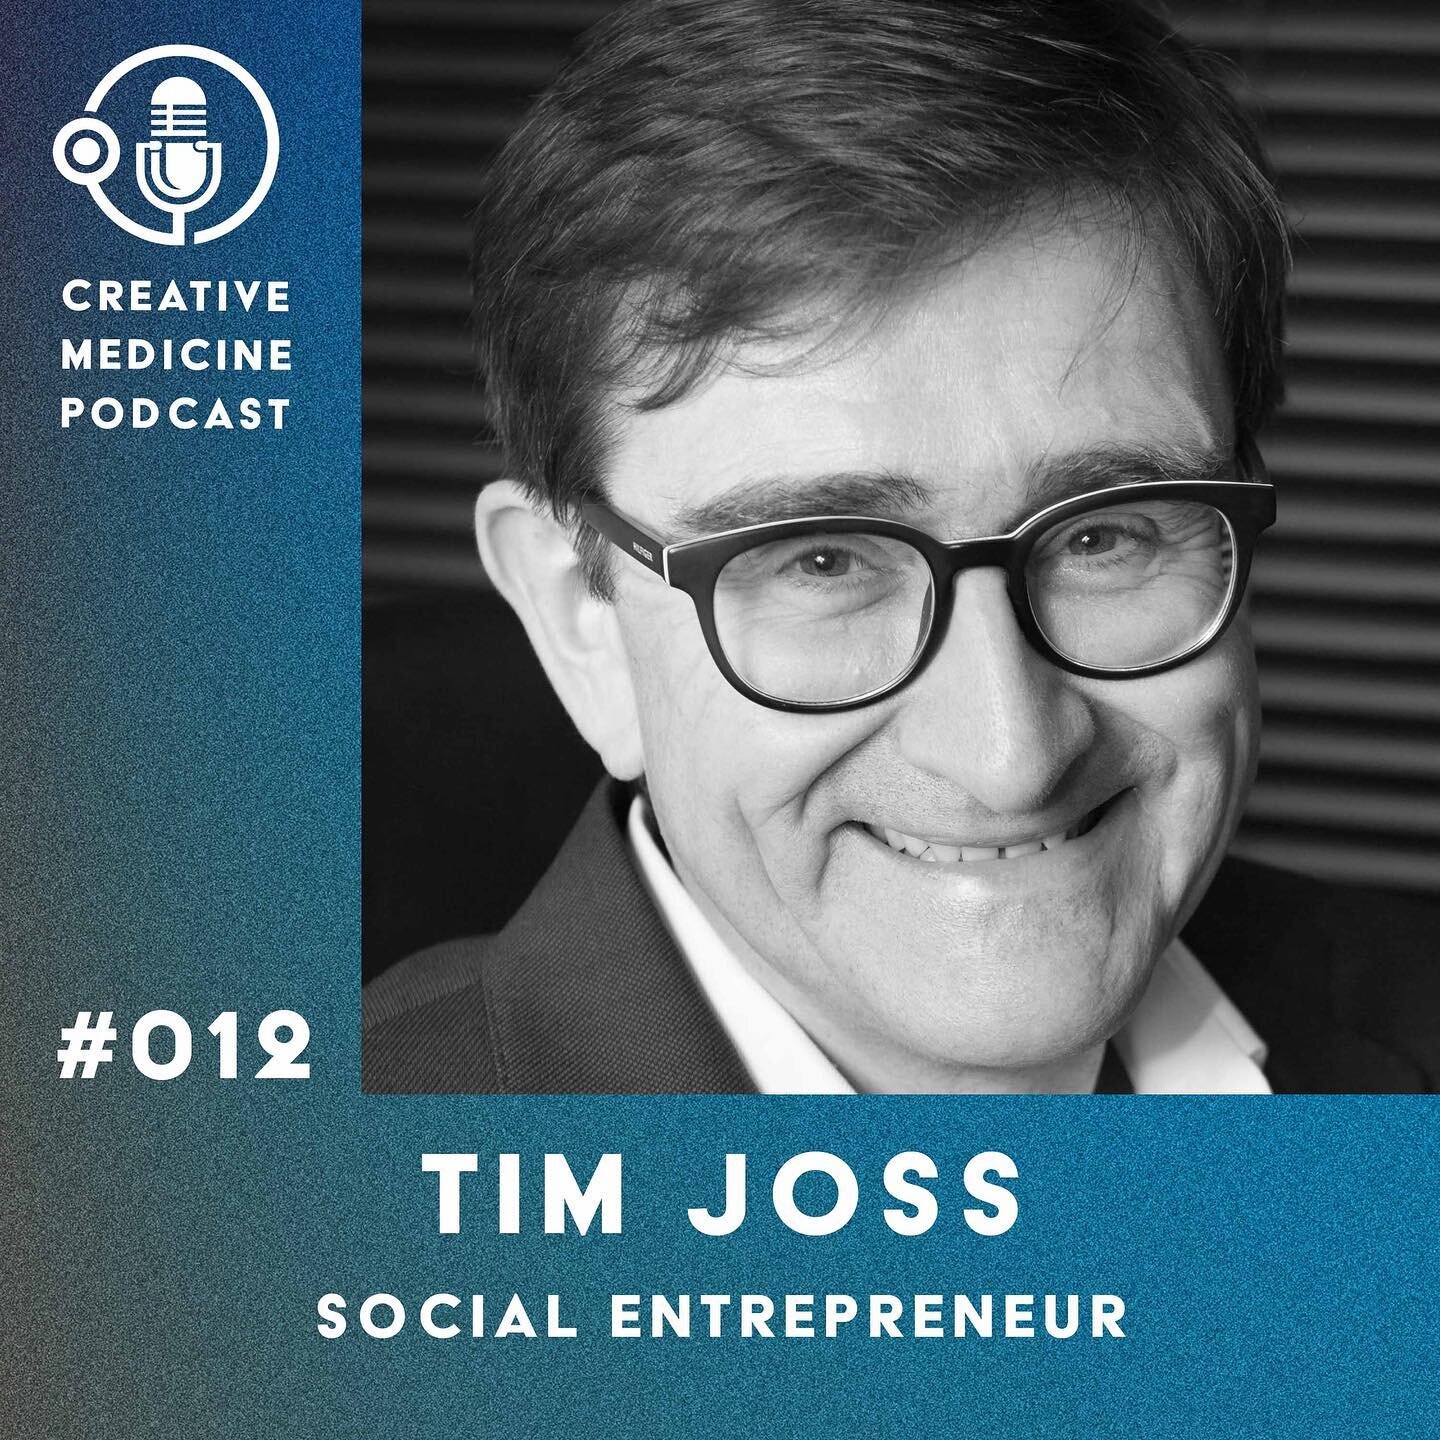 On this week&rsquo;s episode of the Creative Medicine Podcast, I&rsquo;ll be speaking with Tim Joss, Chief Executive and Founder or Aesop, an arts enterprise with Social Purpose. 

We talk about the exciting progress with arts in health projects and 